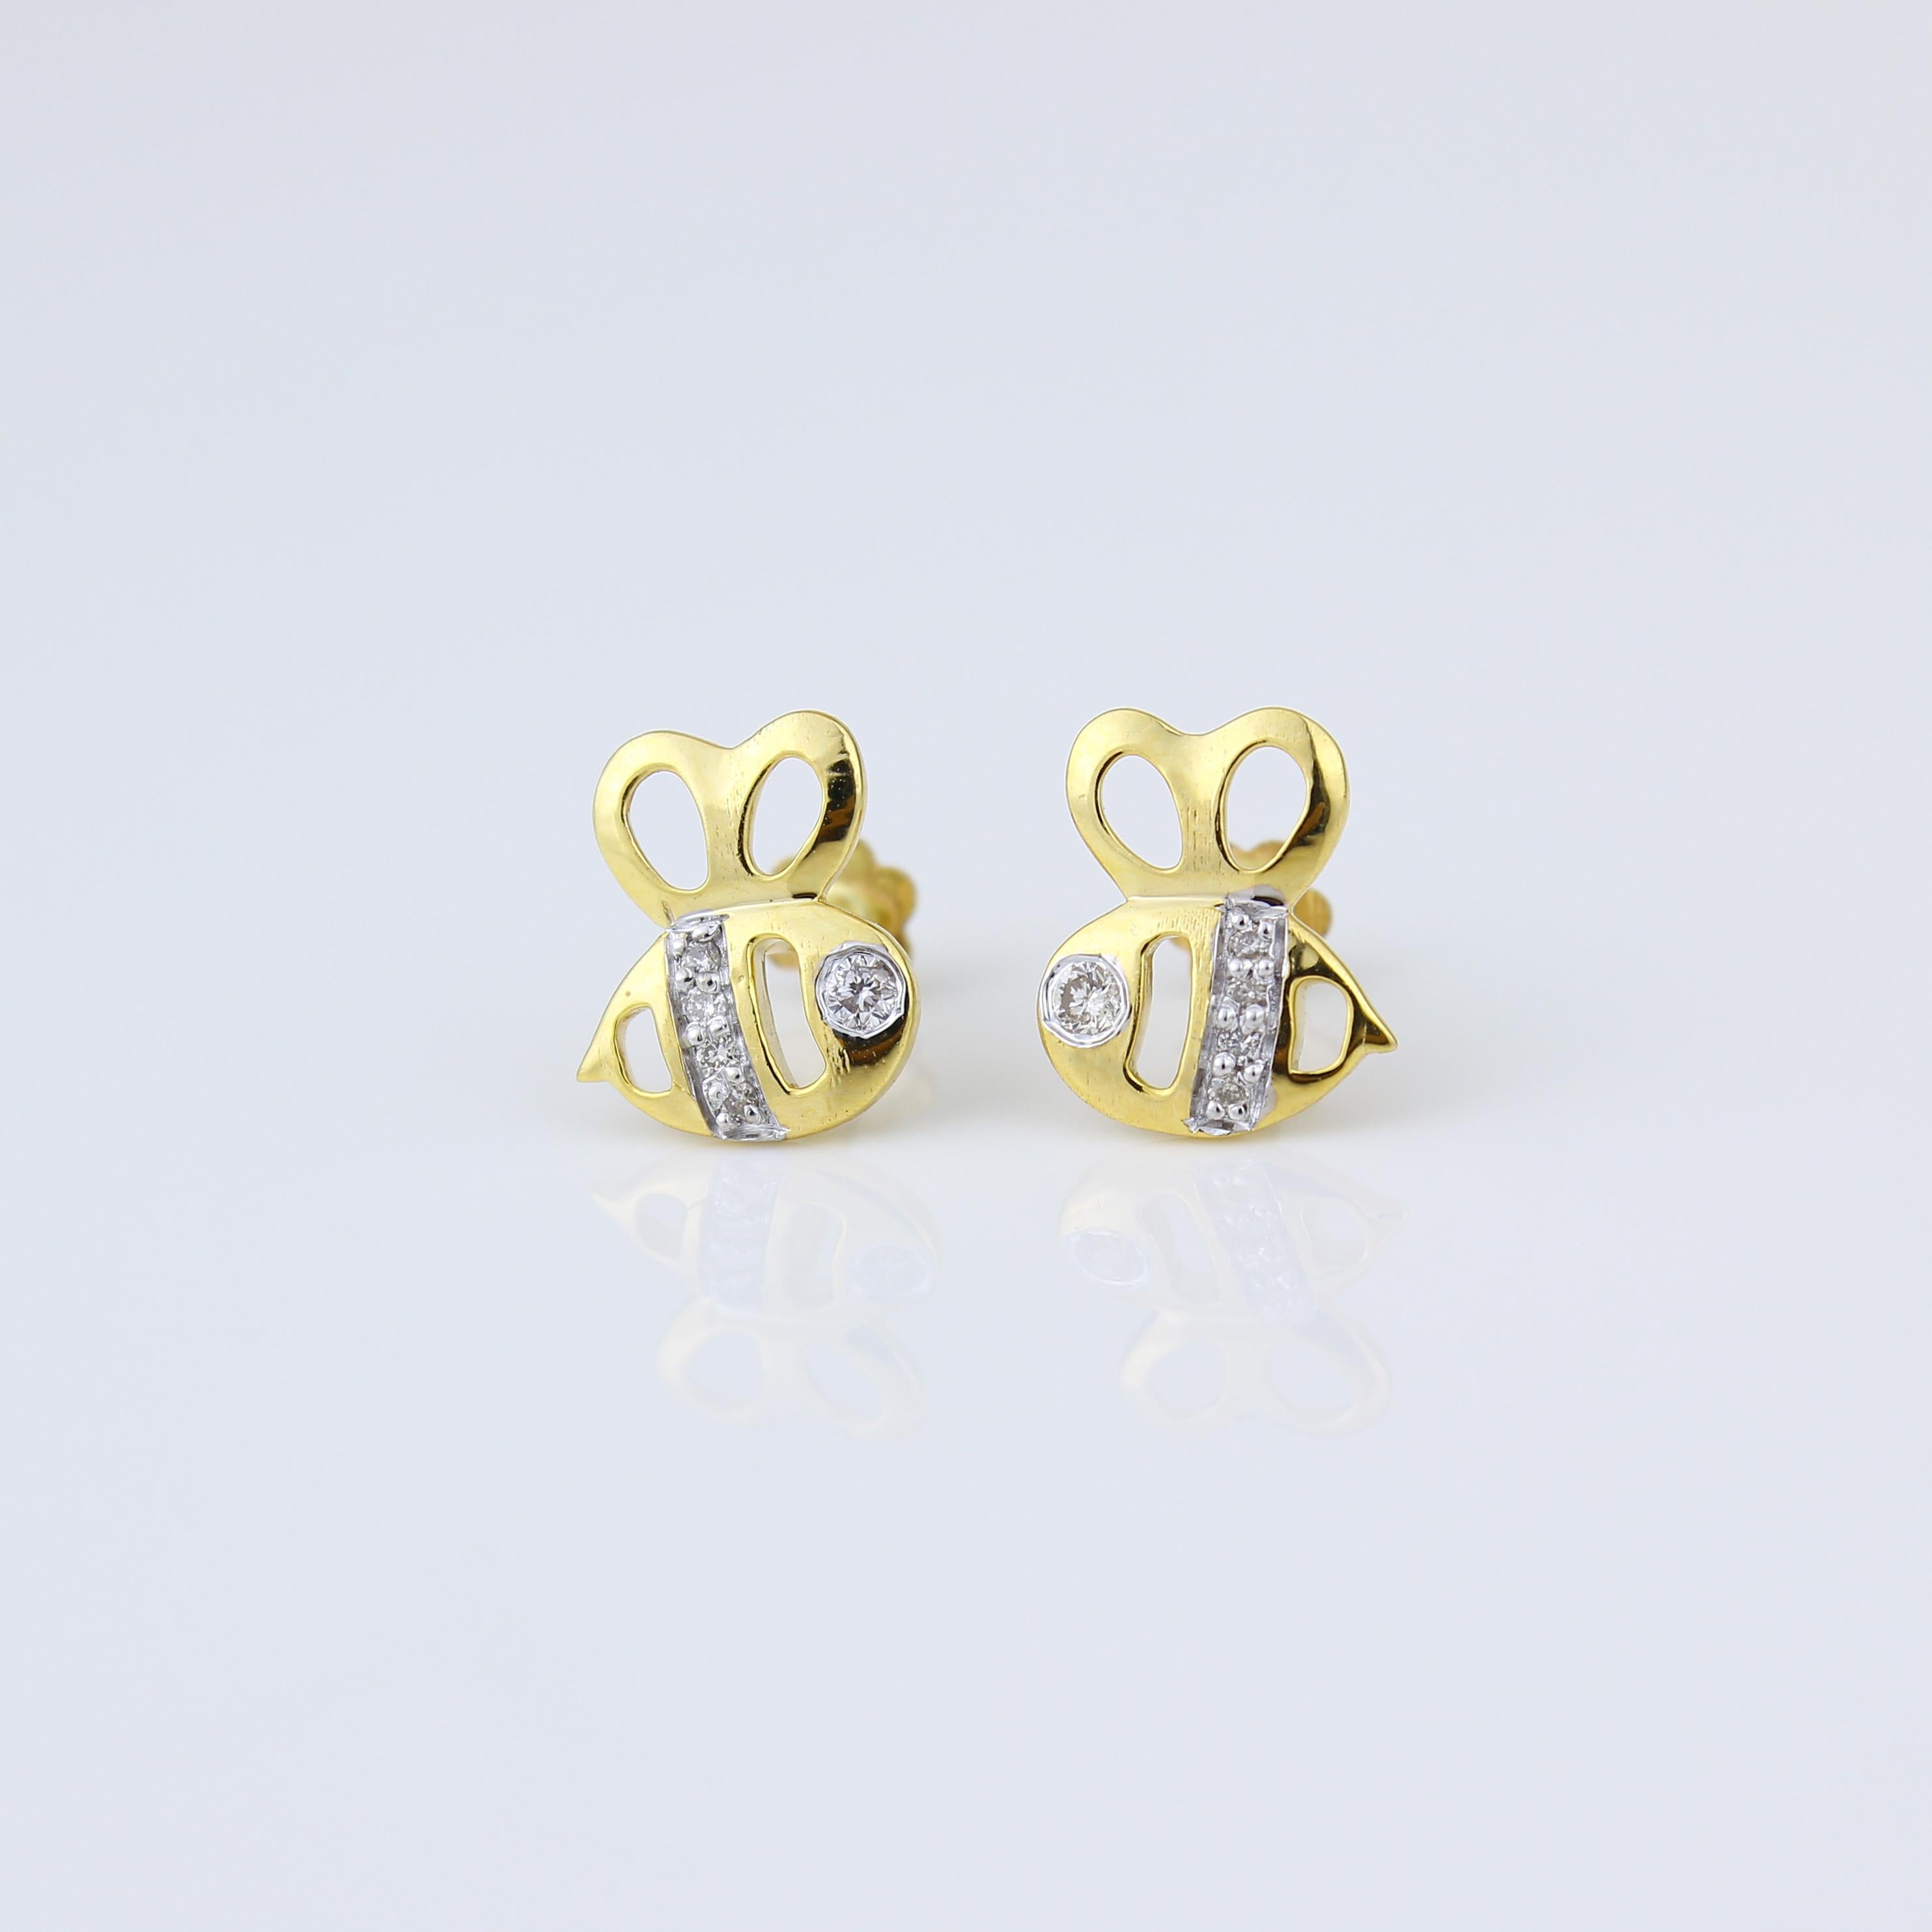 The Honeybee Diamond Kid Earrings are a delightful and charming accessory for young fashion enthusiasts. Expertly crafted from 18K solid gold, these earrings feature adorable honeybee designs accented with glimmering diamonds. With their playful yet